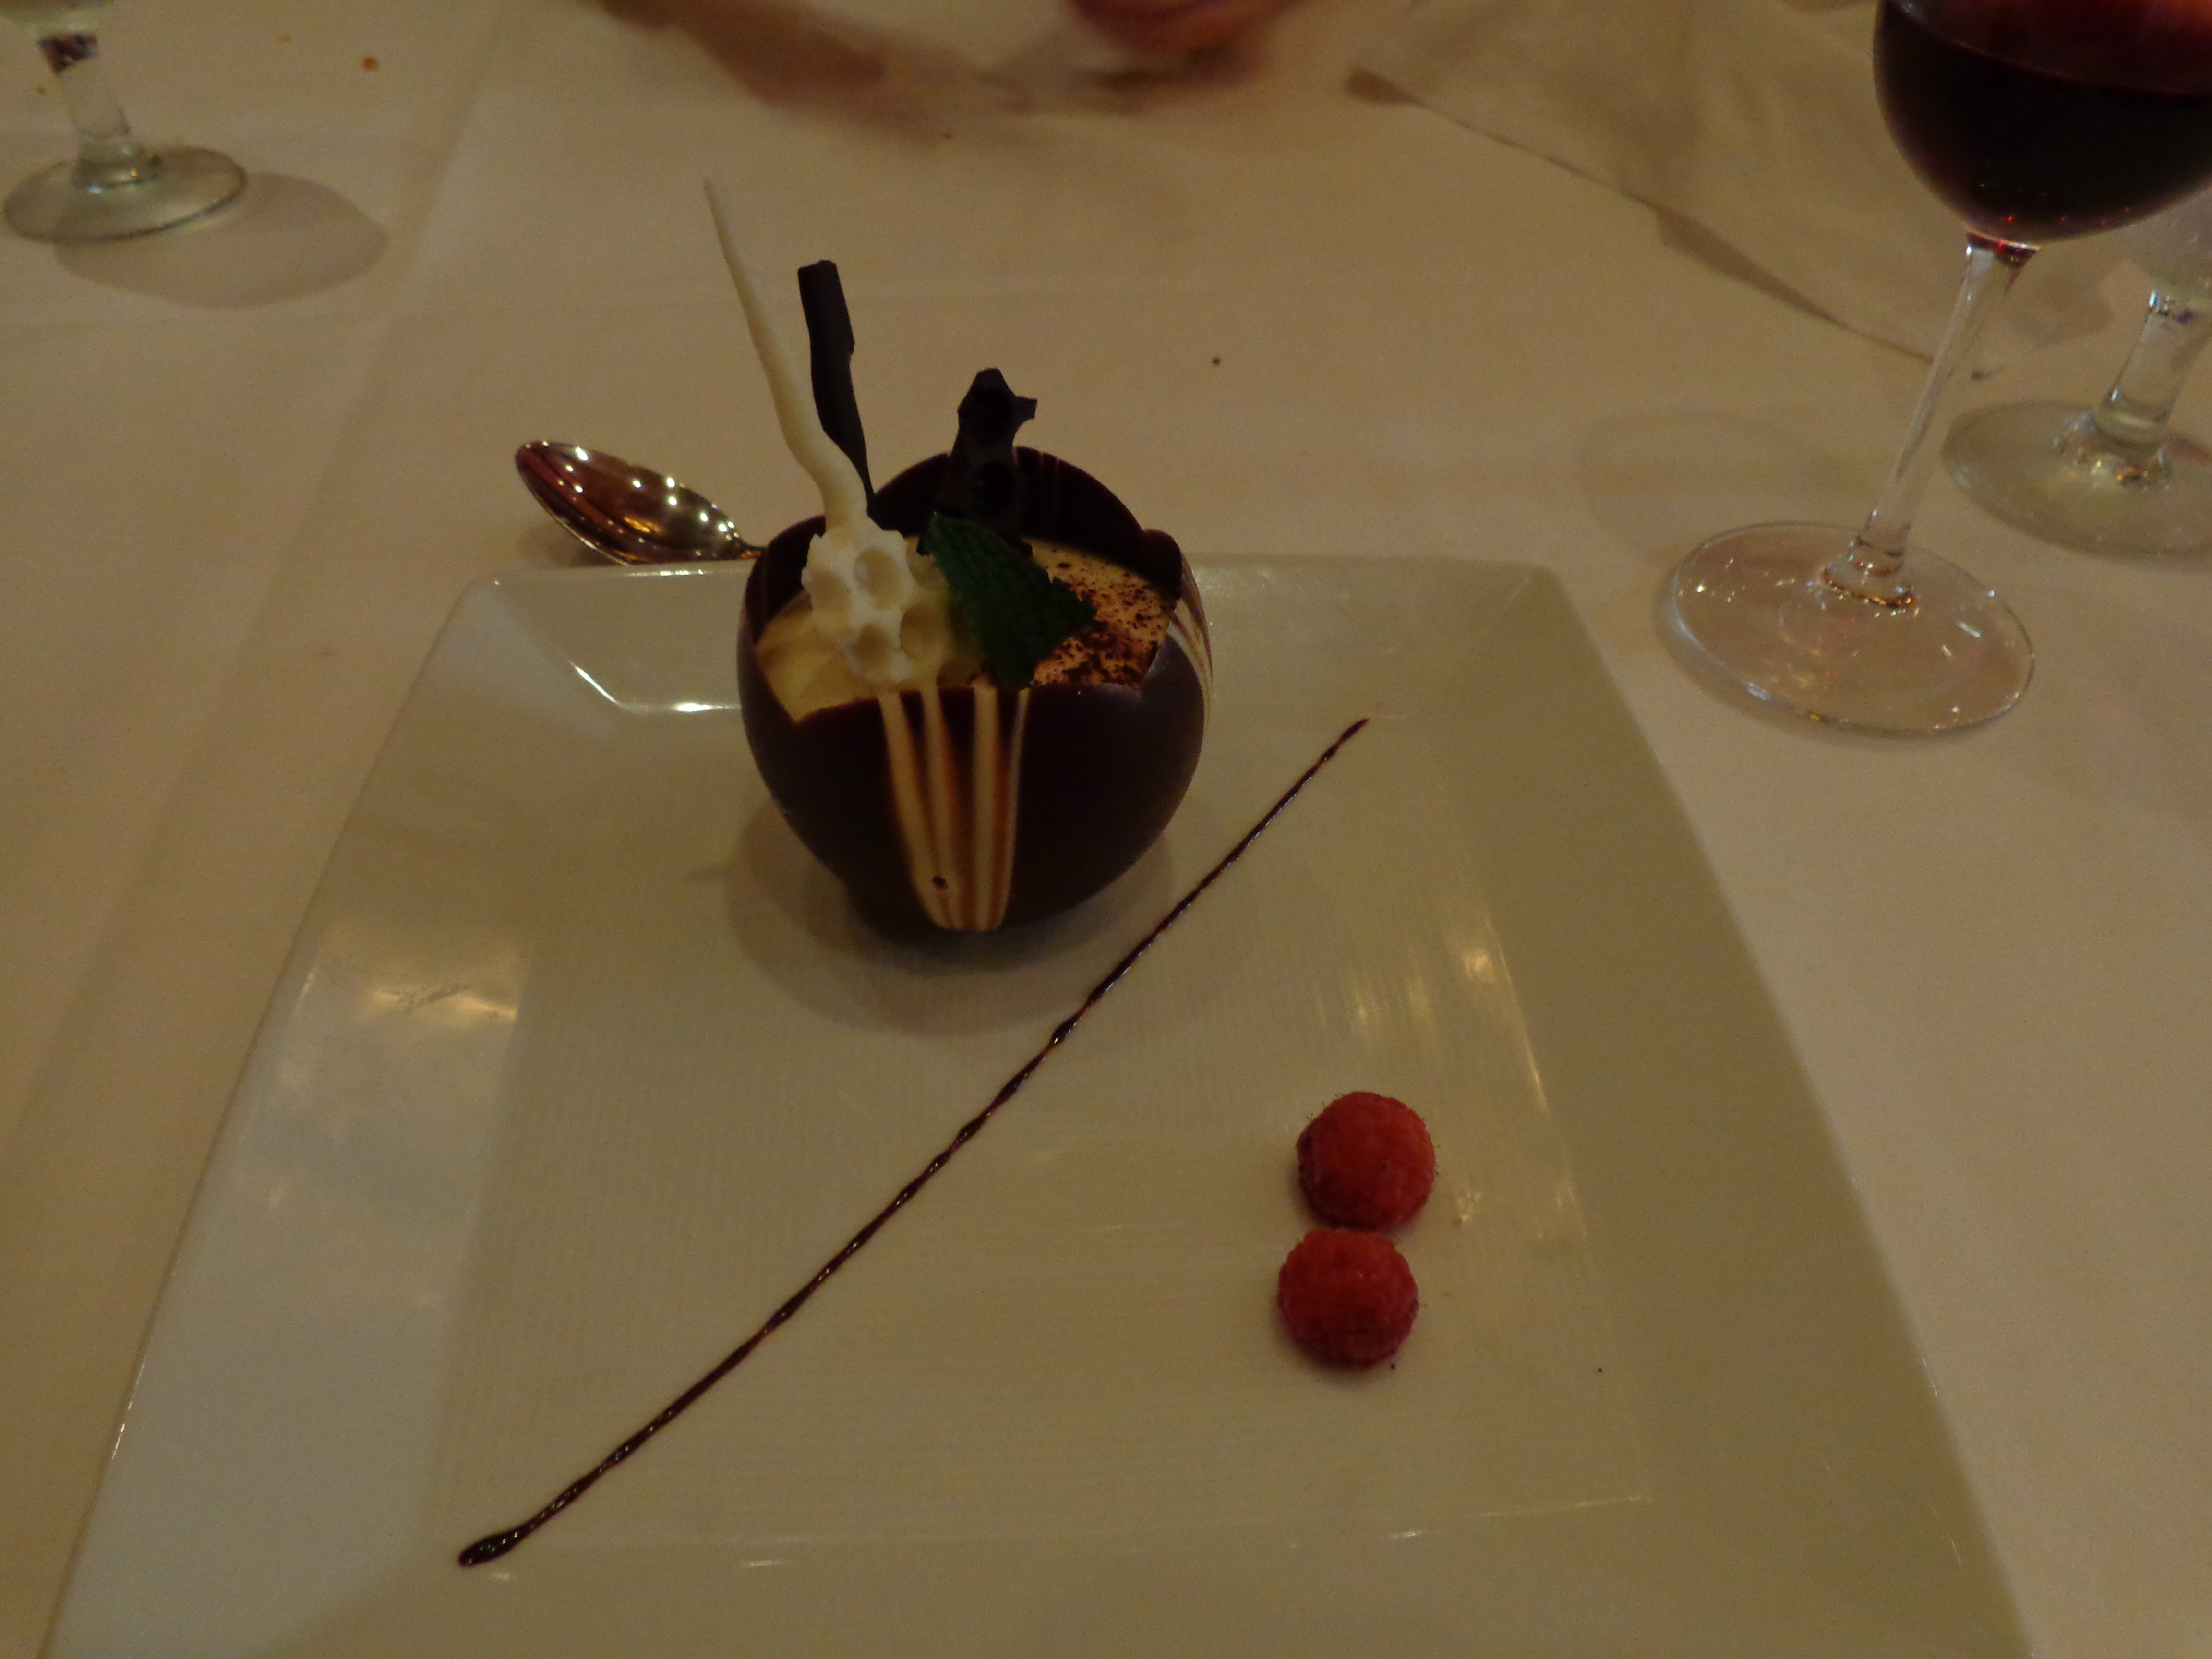 One of the fabulous desserts, a chocolate ball filled with mocha ice cream